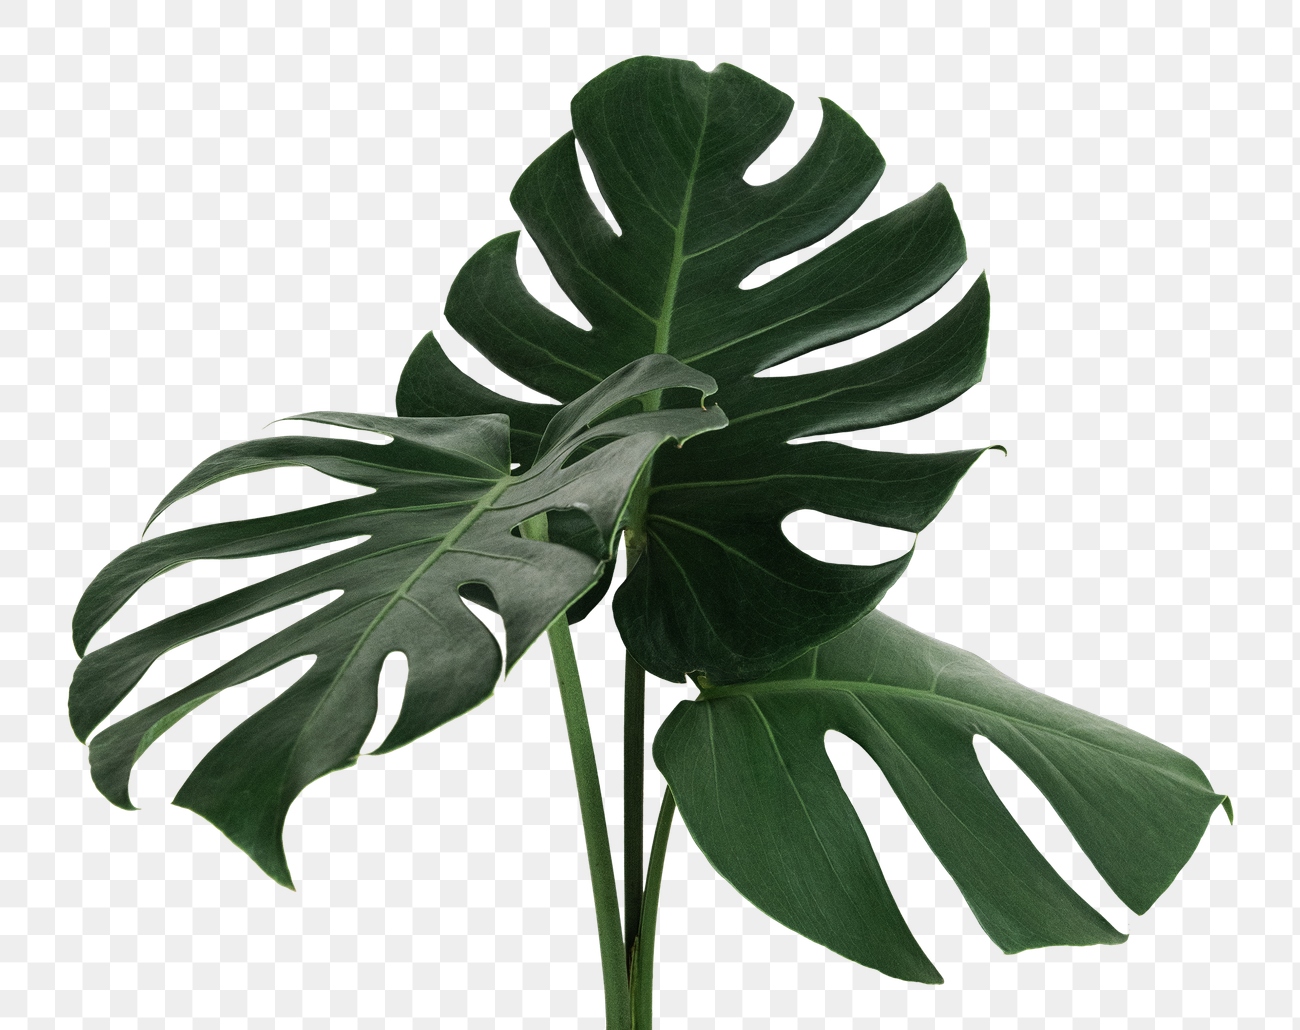 Free royalty image about Split leaf philodendron, monstera plant ...